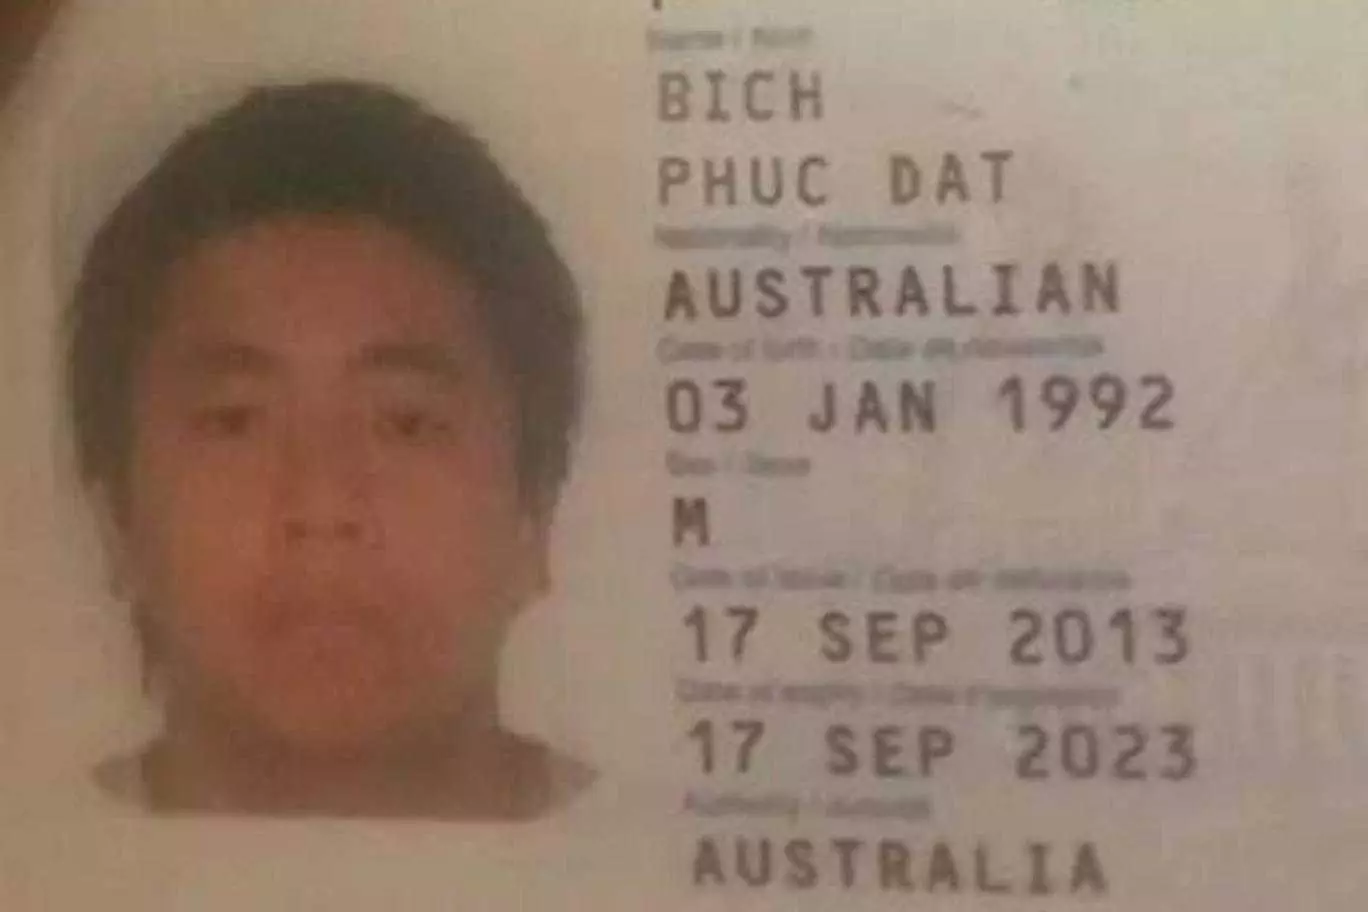 Man Named Phuc Dat Bich Got Banned From Facebook  Rant Quickly Follows Pics 1